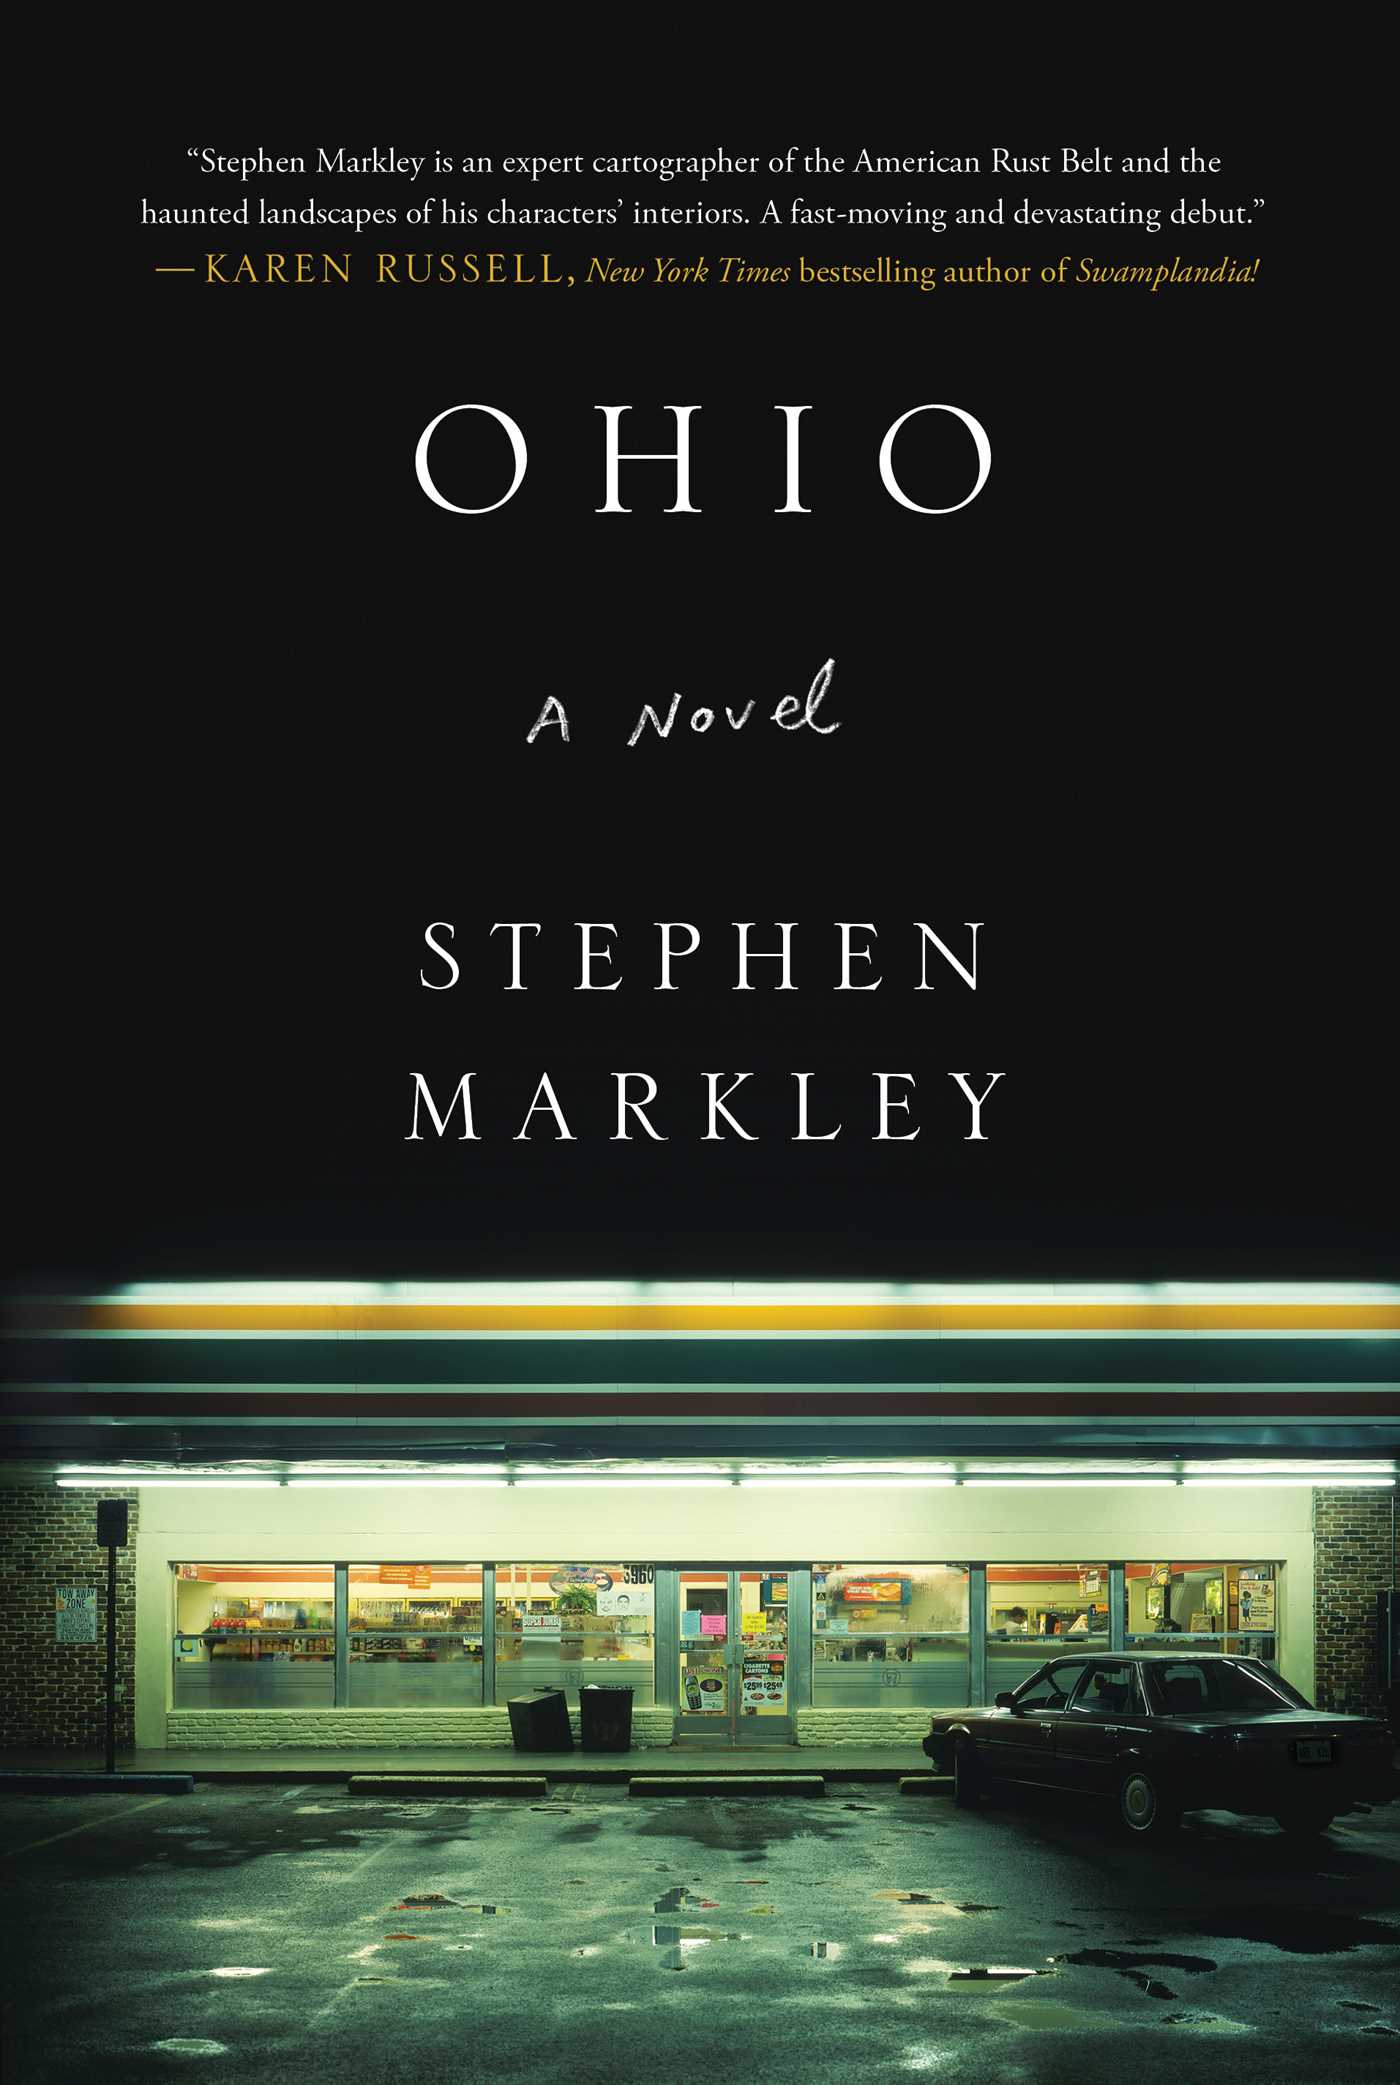 Ohio by Stephen Markley Book Review